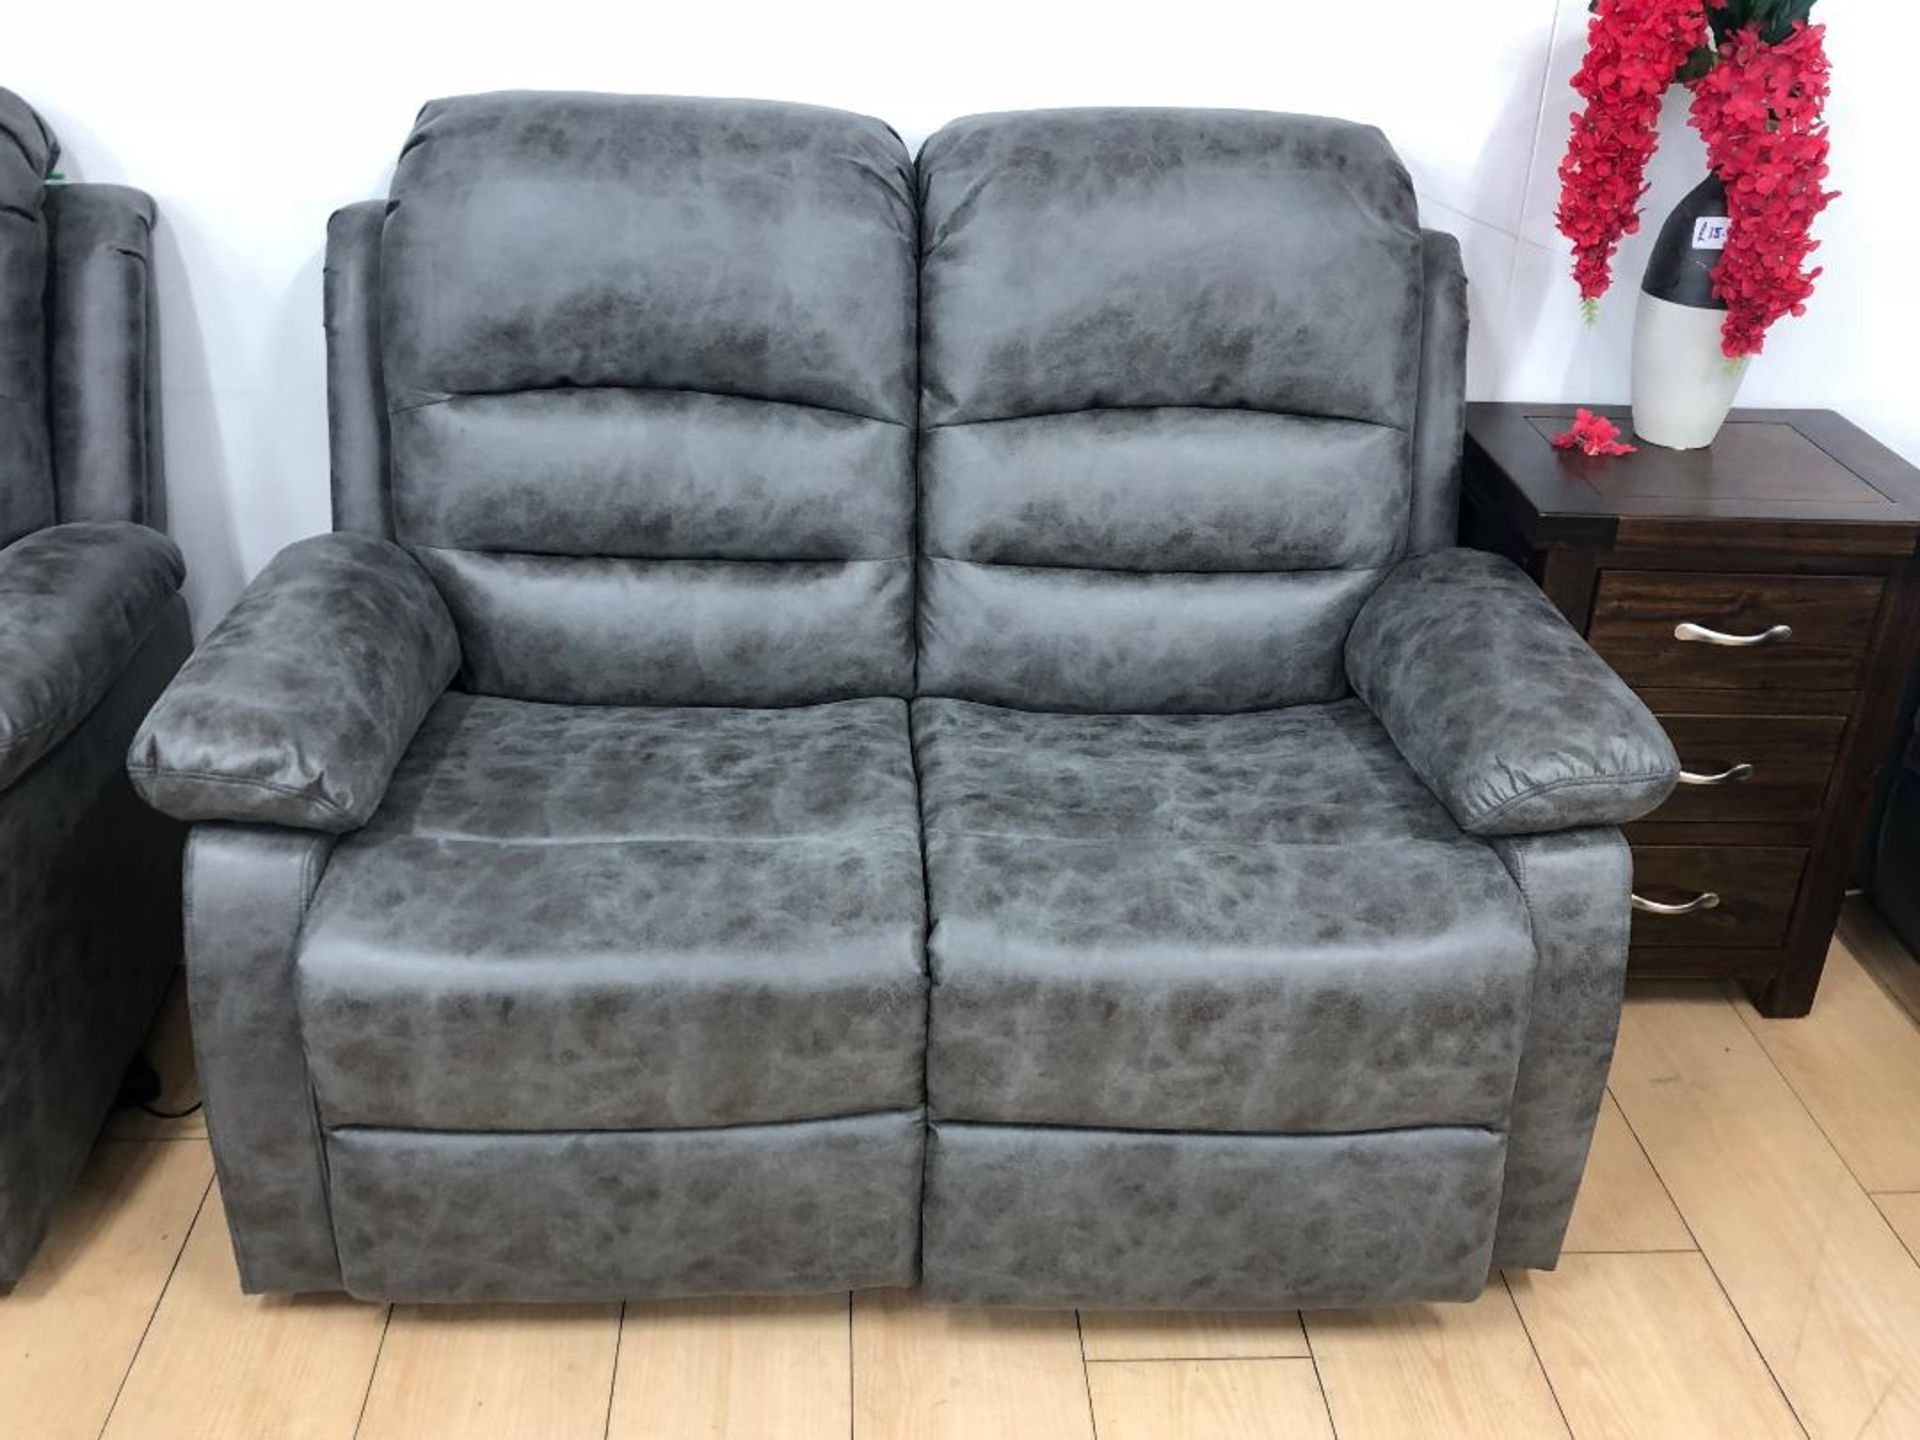 Brand new boxed Cartier 3 seater plus 2 seater grey electric reclining sofas - Image 2 of 2